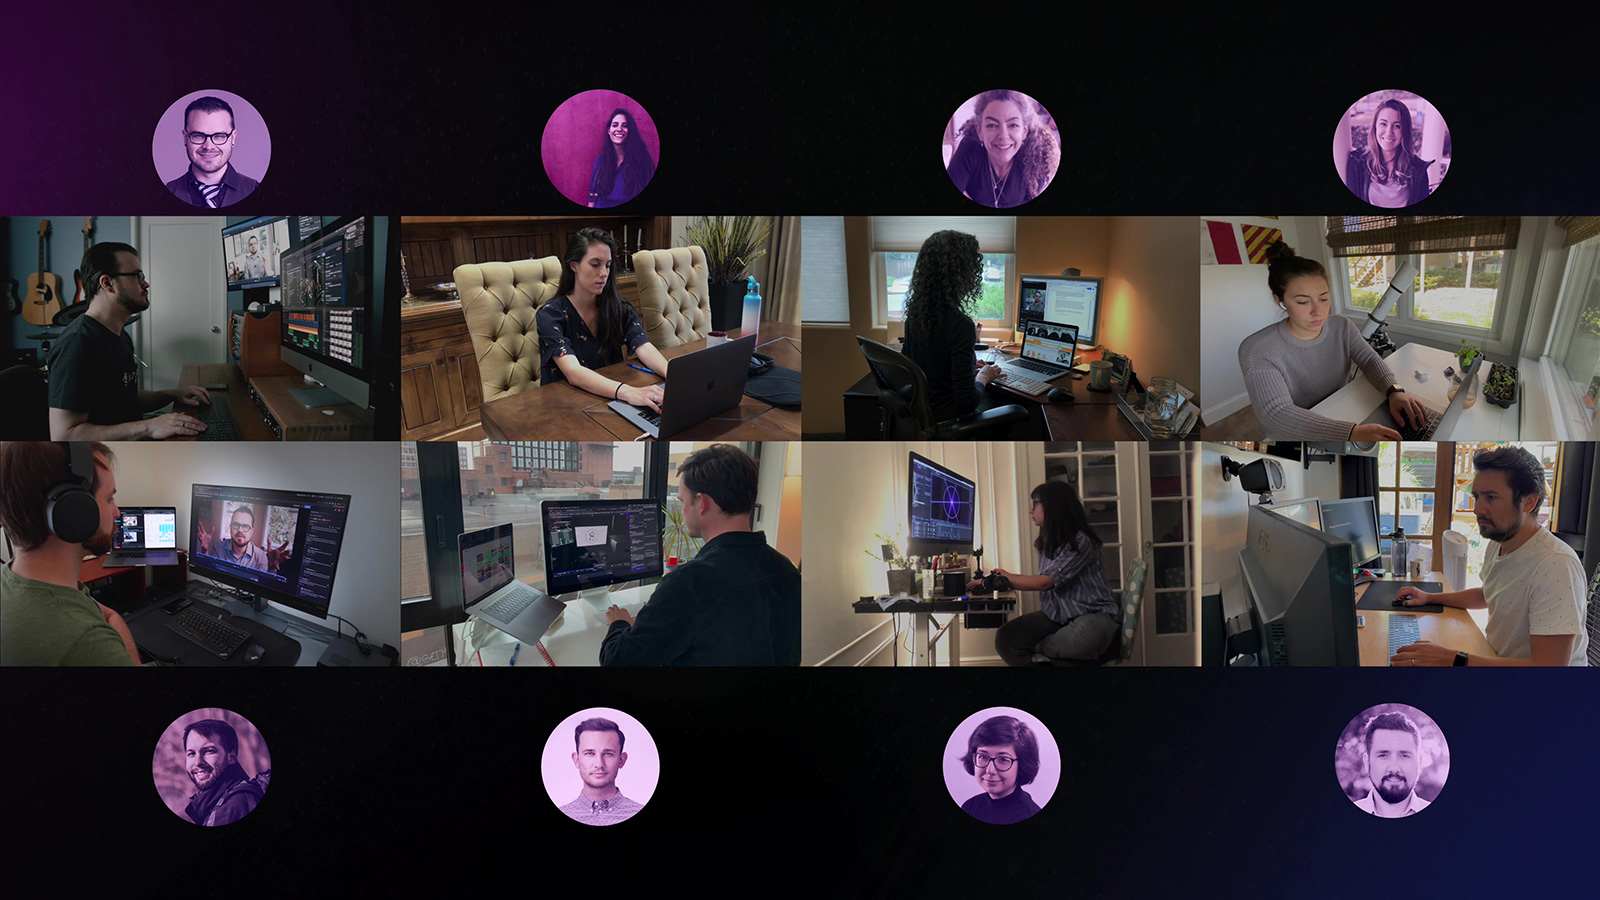 Collage of the distributed production team of the Worfklow From Home series.